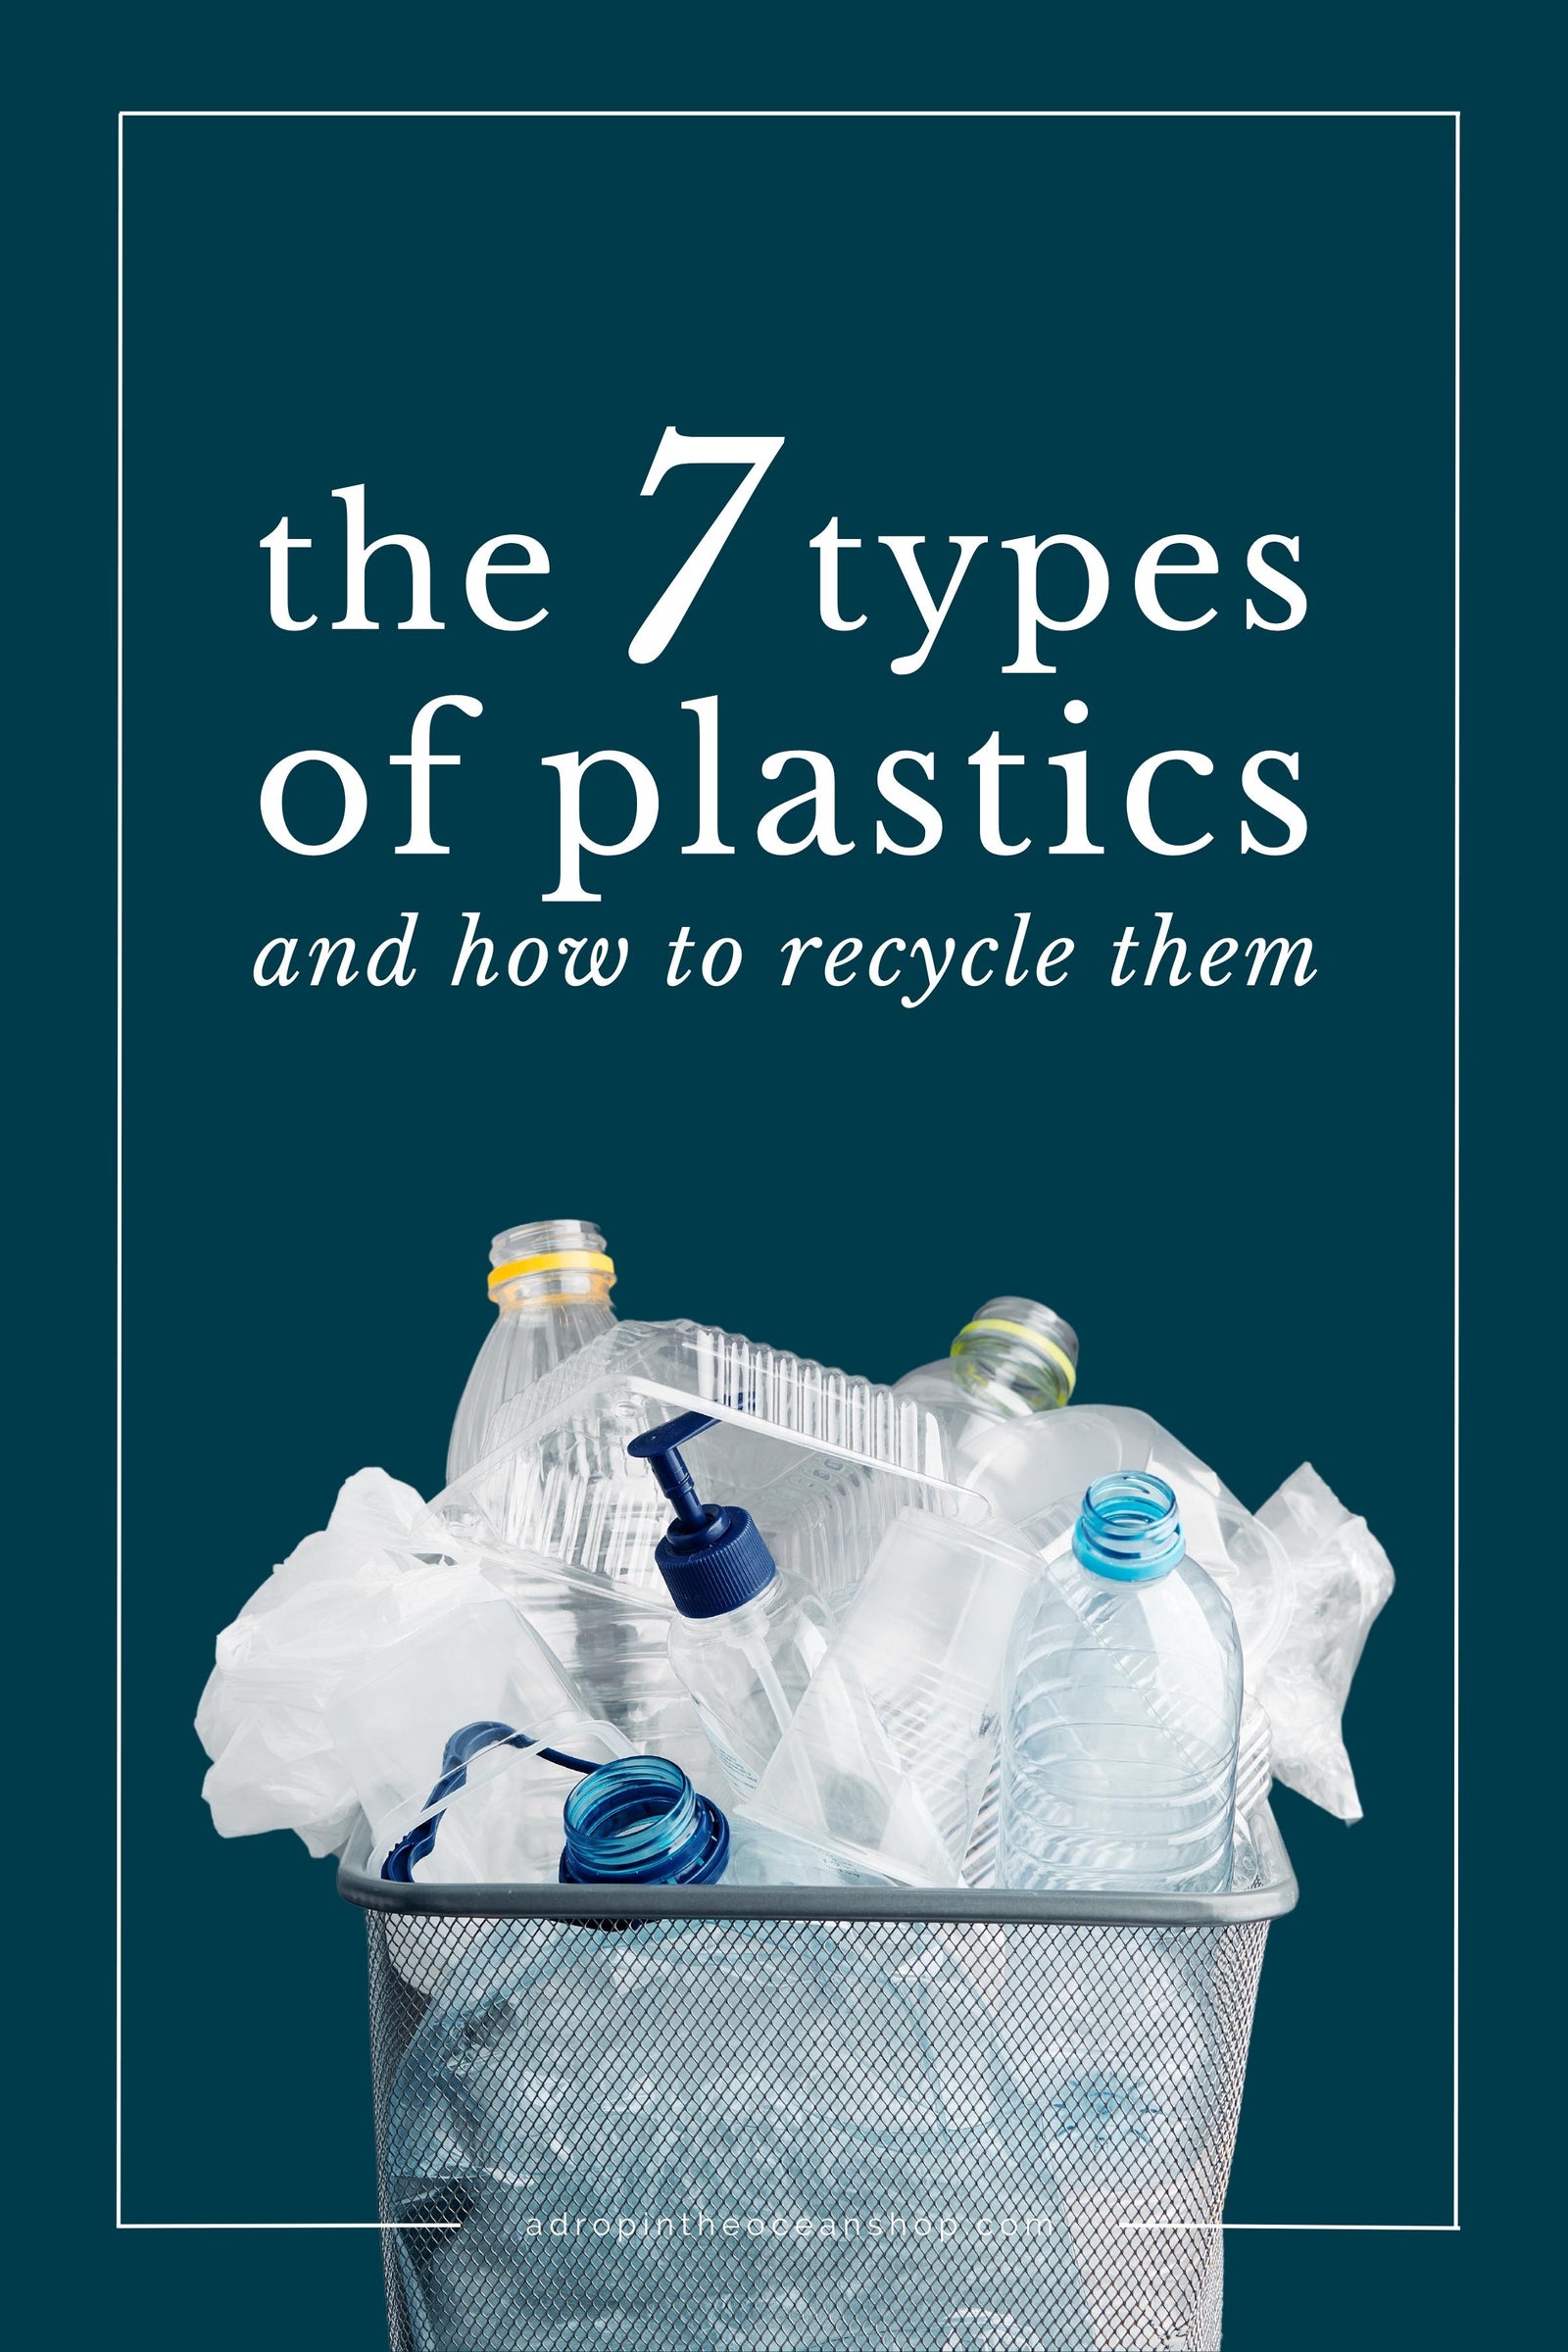 The 7 Types of Plastic You Need to Know (And How to Recycle Them)